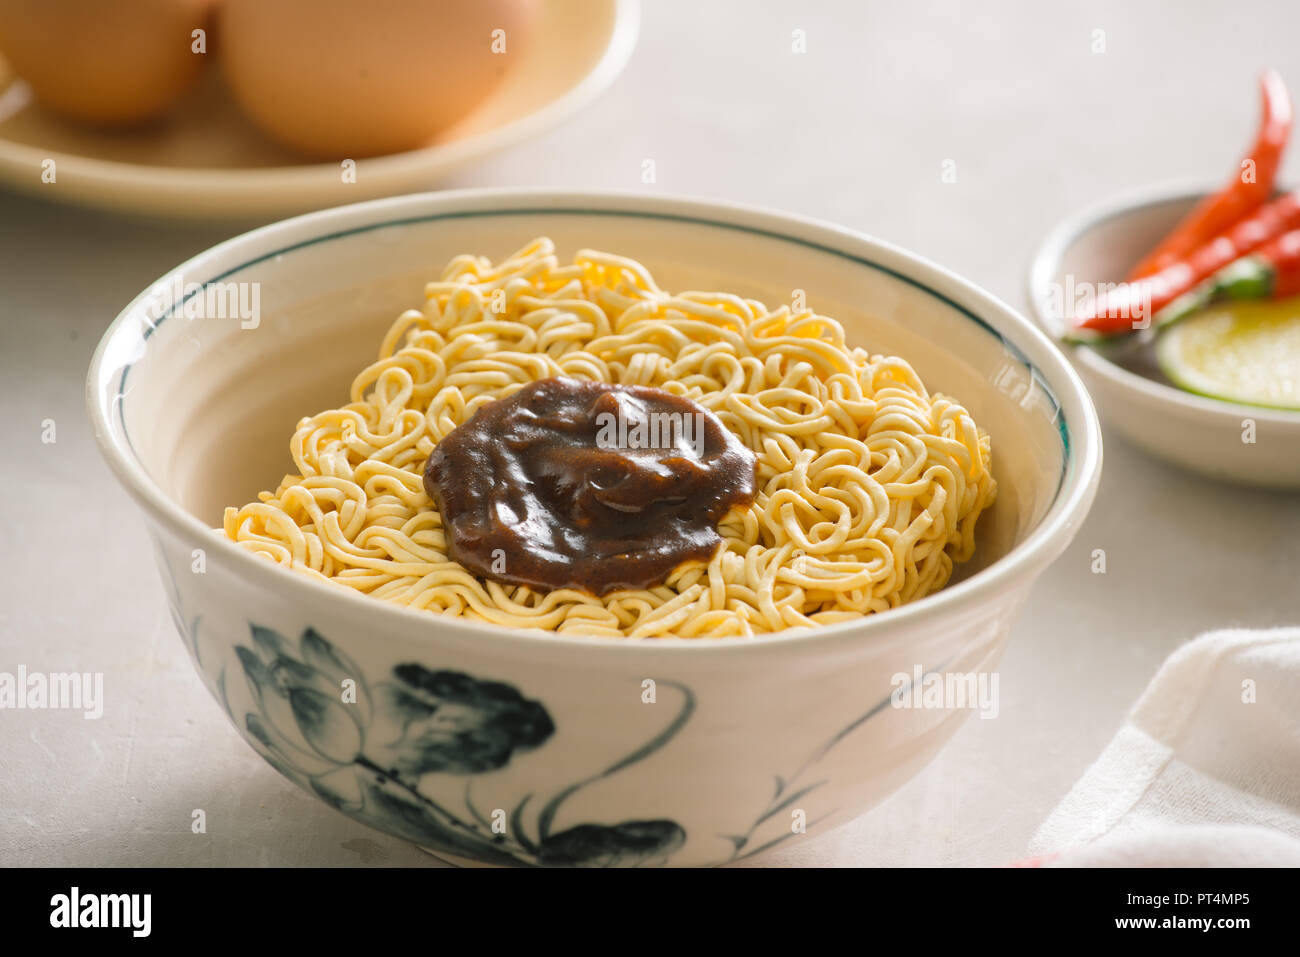 Instant noodles in bowl and vegetable side dishes on stone background. Quick & easy food concept. Stock Photo